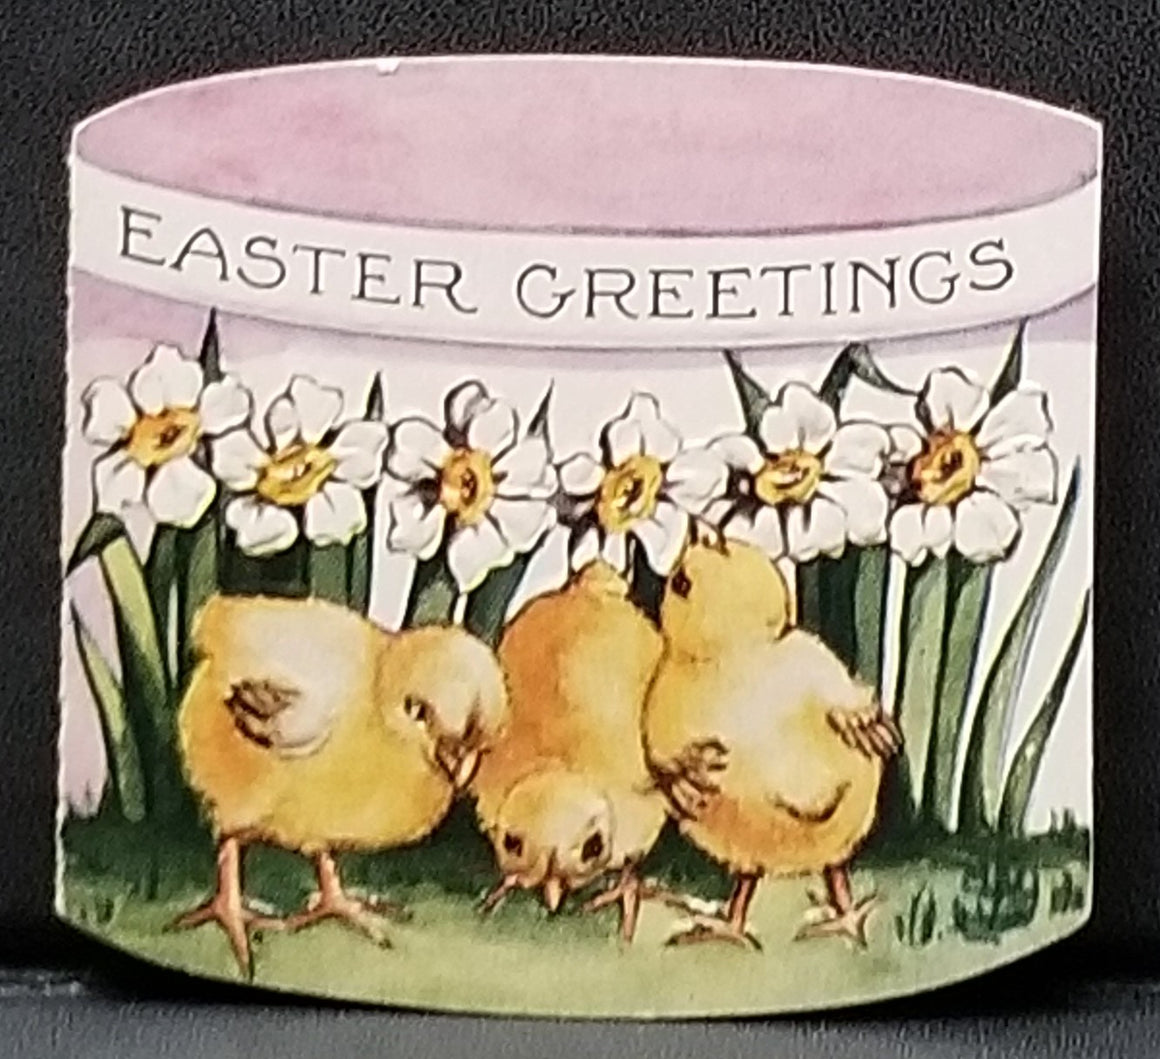 Easter Die Cut with Baby Ducks Smelling Daisies Mechanical Card Opens Into Hat